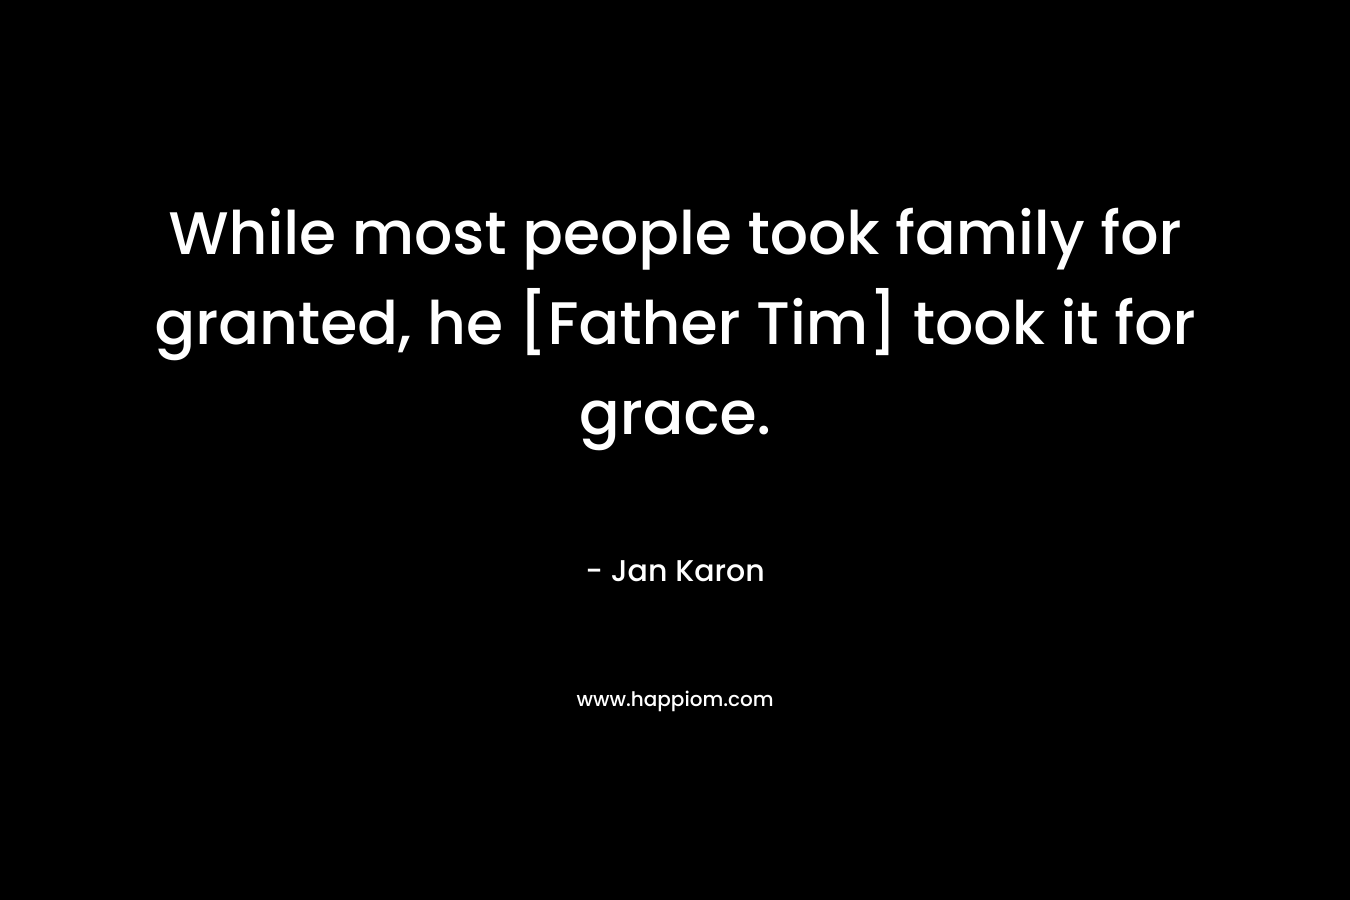 While most people took family for granted, he [Father Tim] took it for grace.